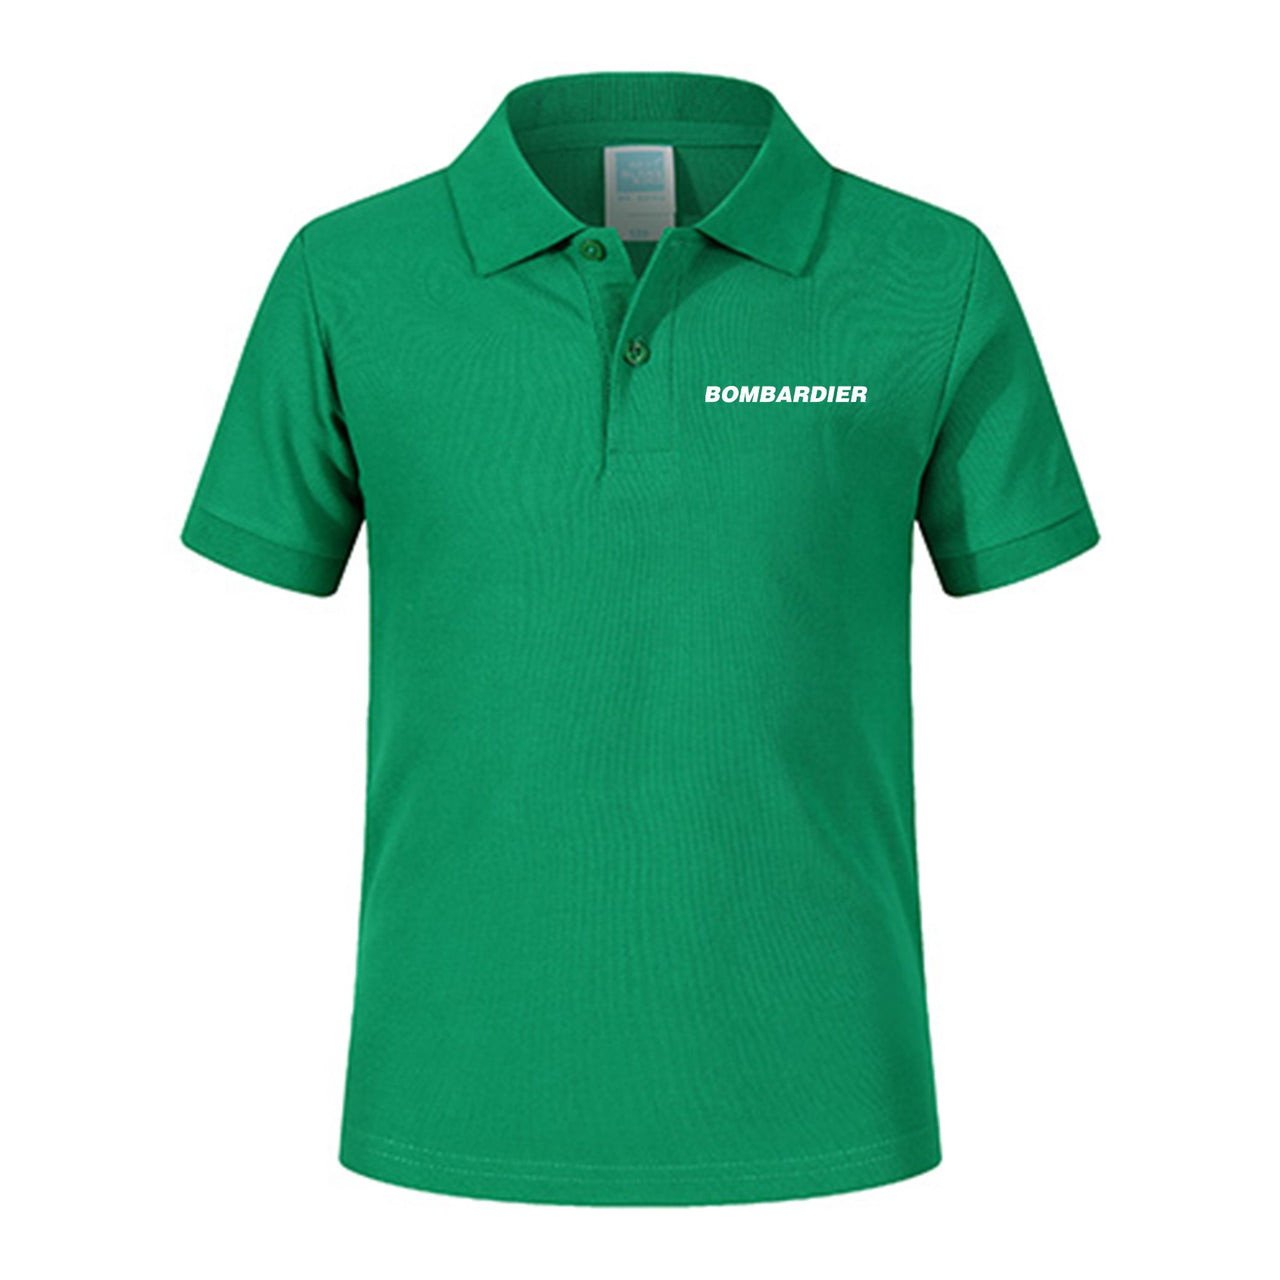 Bombardier & Text Designed Children Polo T-Shirts